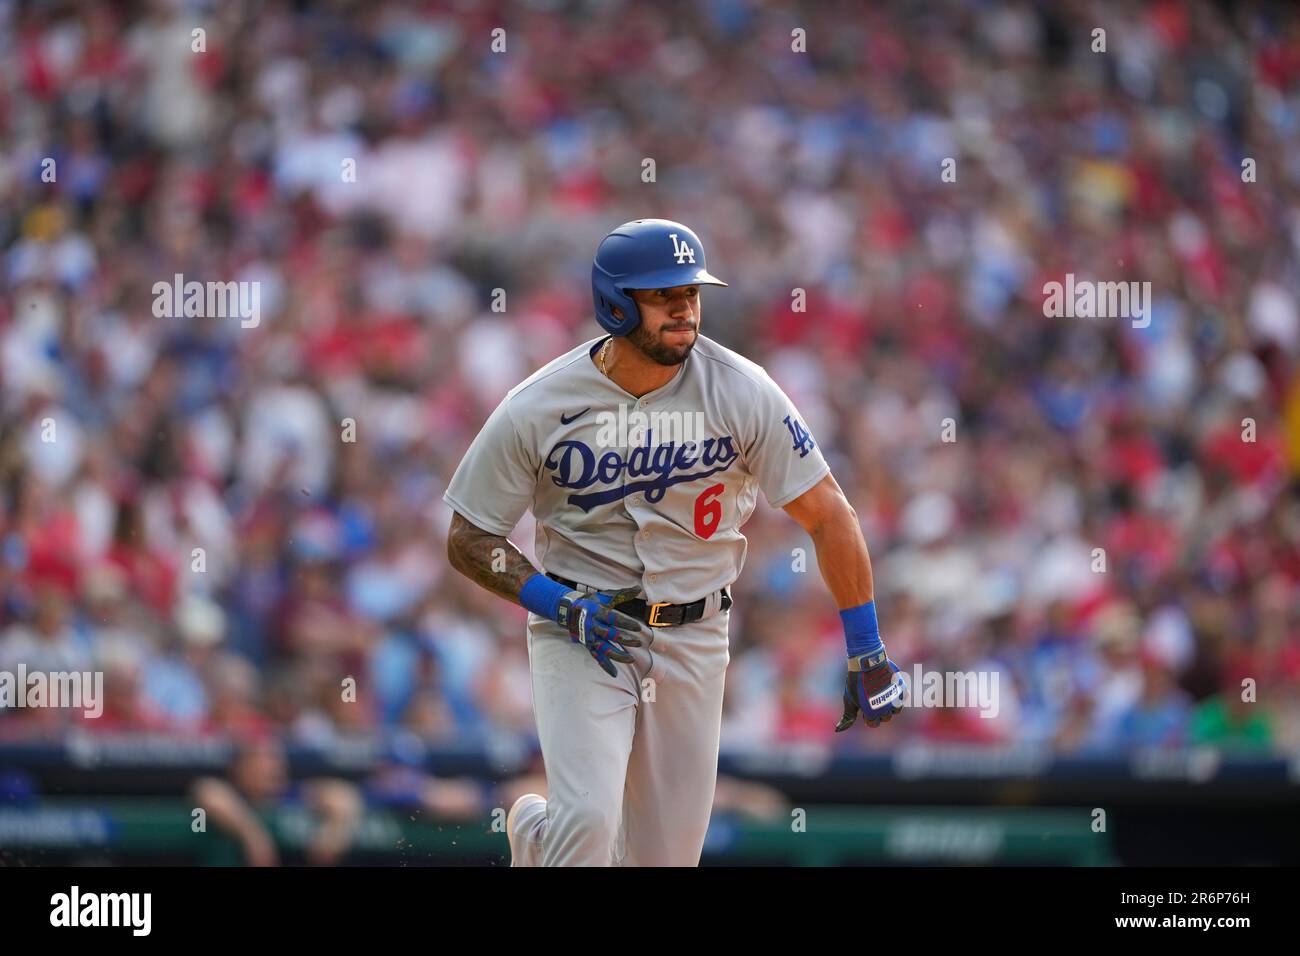 Los Angeles Dodgers' David Peralta plays during the seventh inning